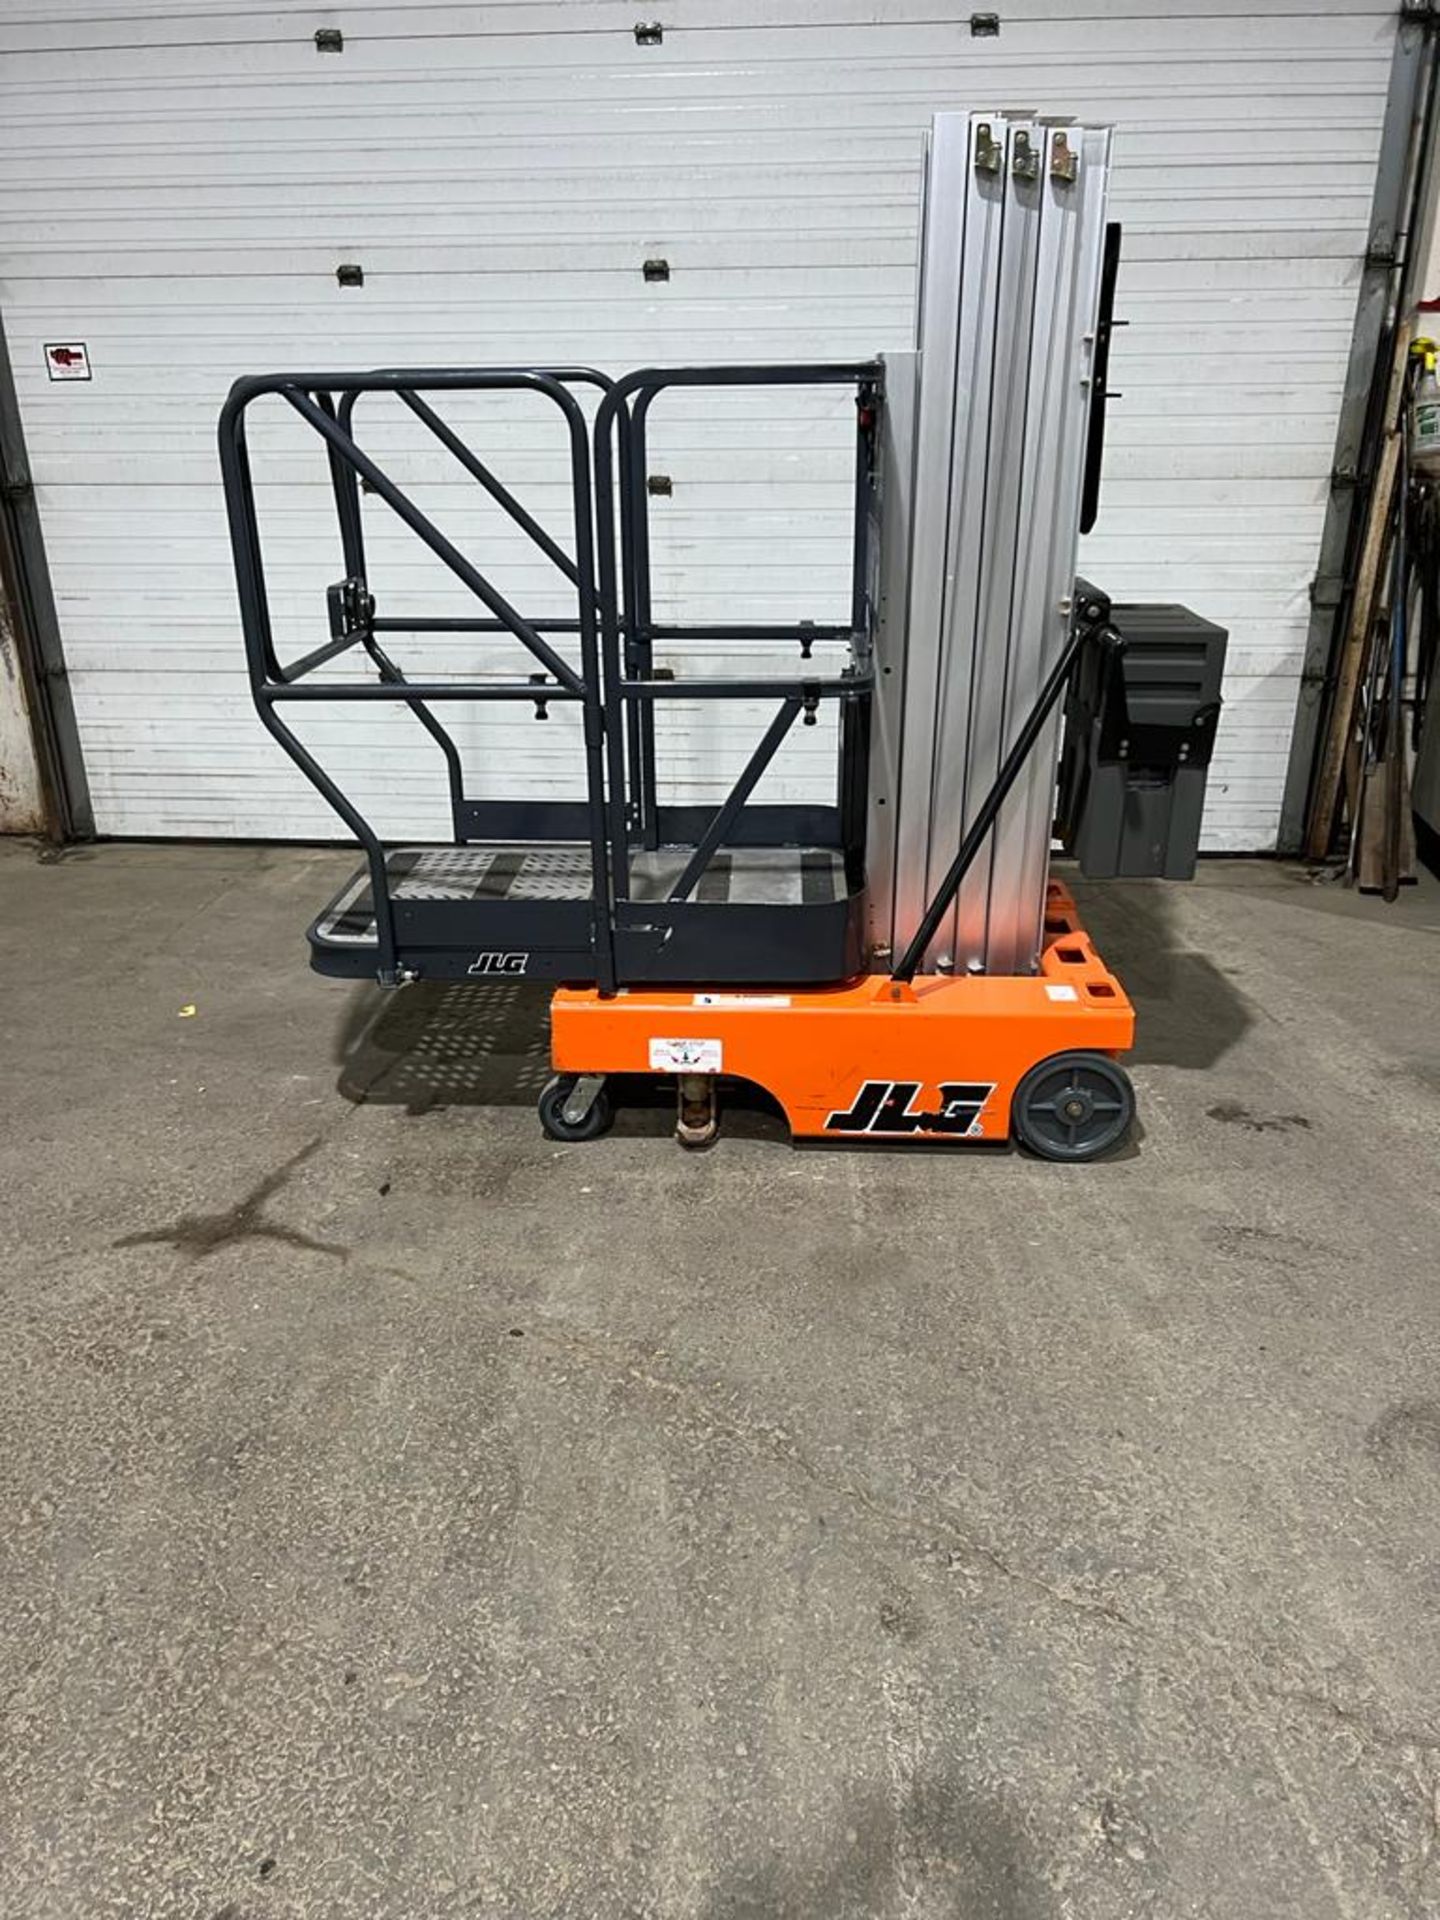 2009 JLG 15SP 400 LB. CAPACITY 24V ELECTRIC ORDER PICKERS WITH 180" MAX. LIFT HEIGHT, BUILT-IN - Image 2 of 4